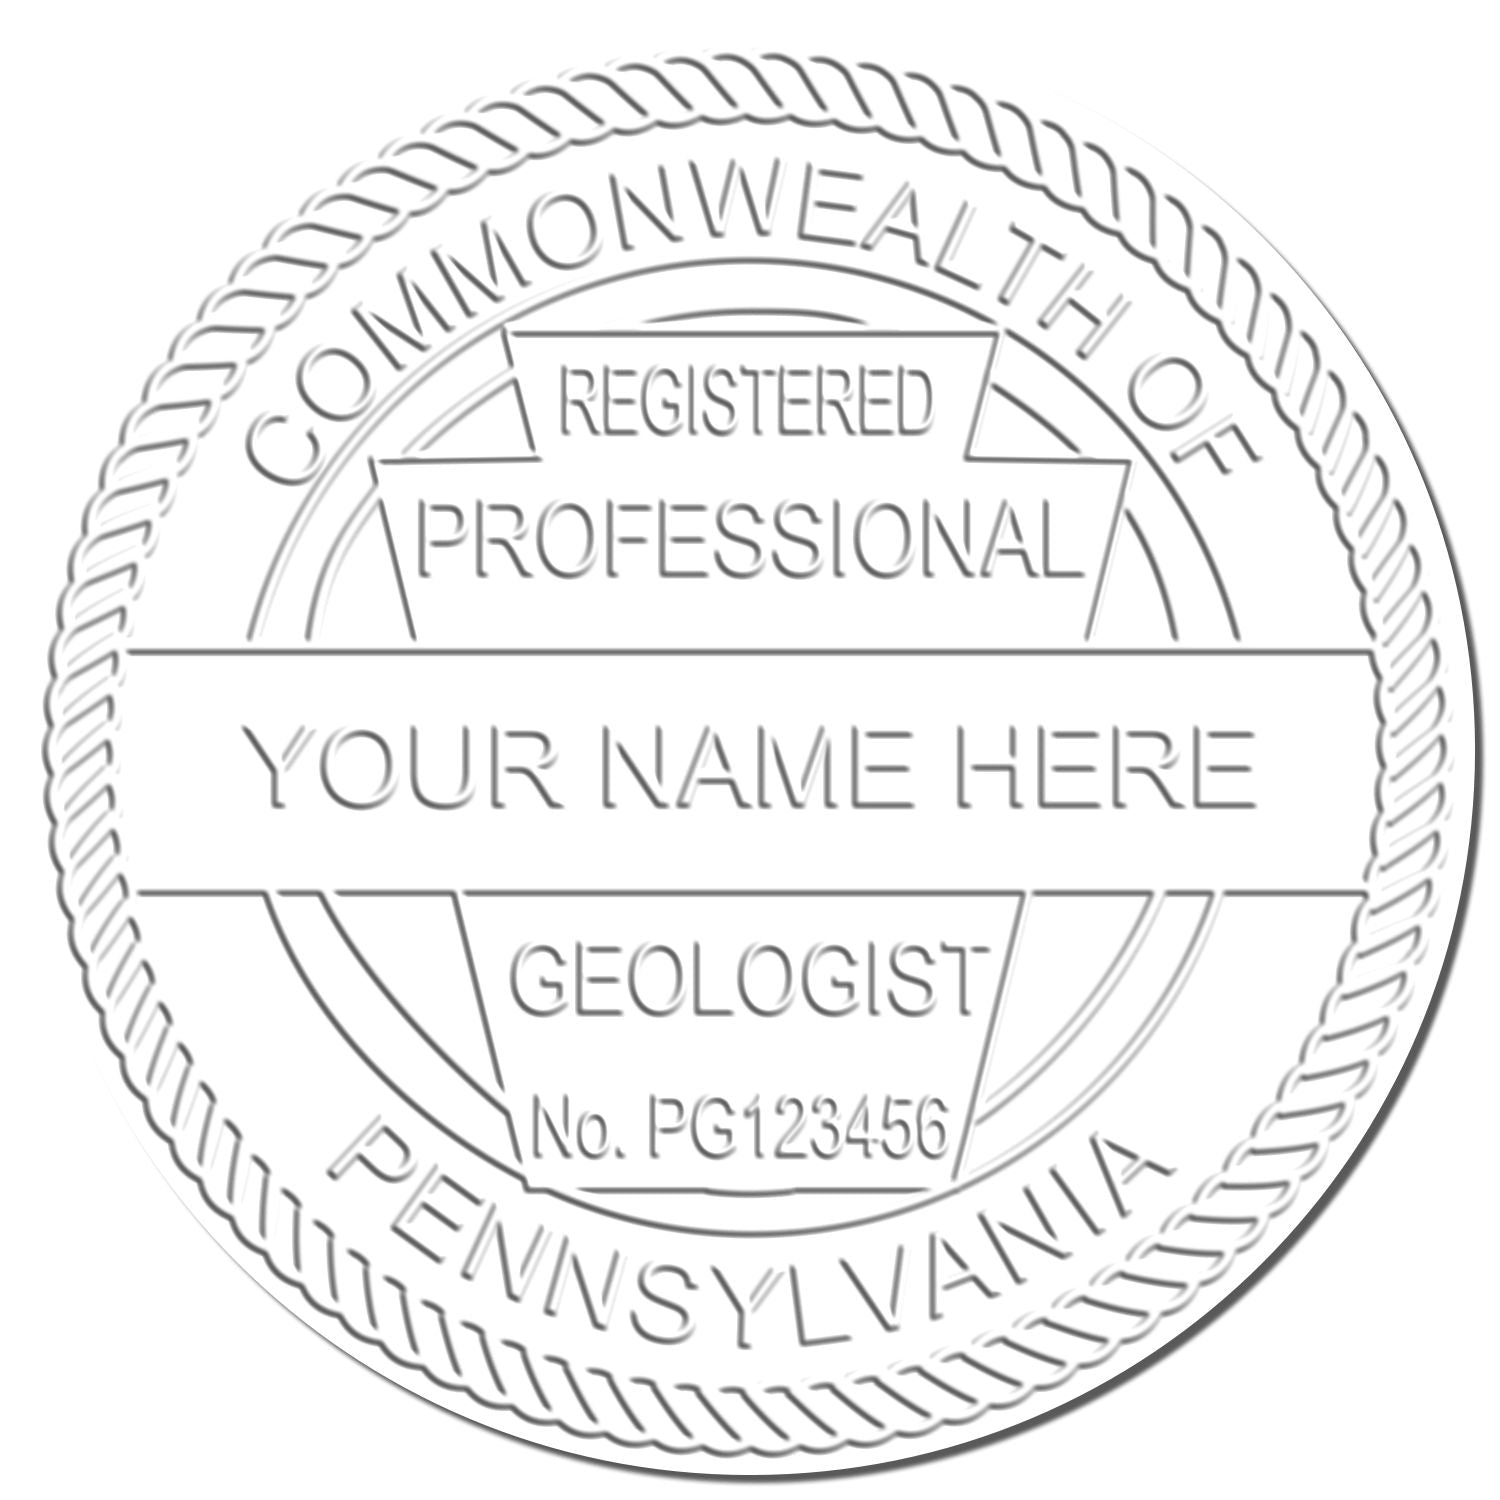 The Pennsylvania Geologist Desk Seal stamp impression comes to life with a crisp, detailed image stamped on paper - showcasing true professional quality.